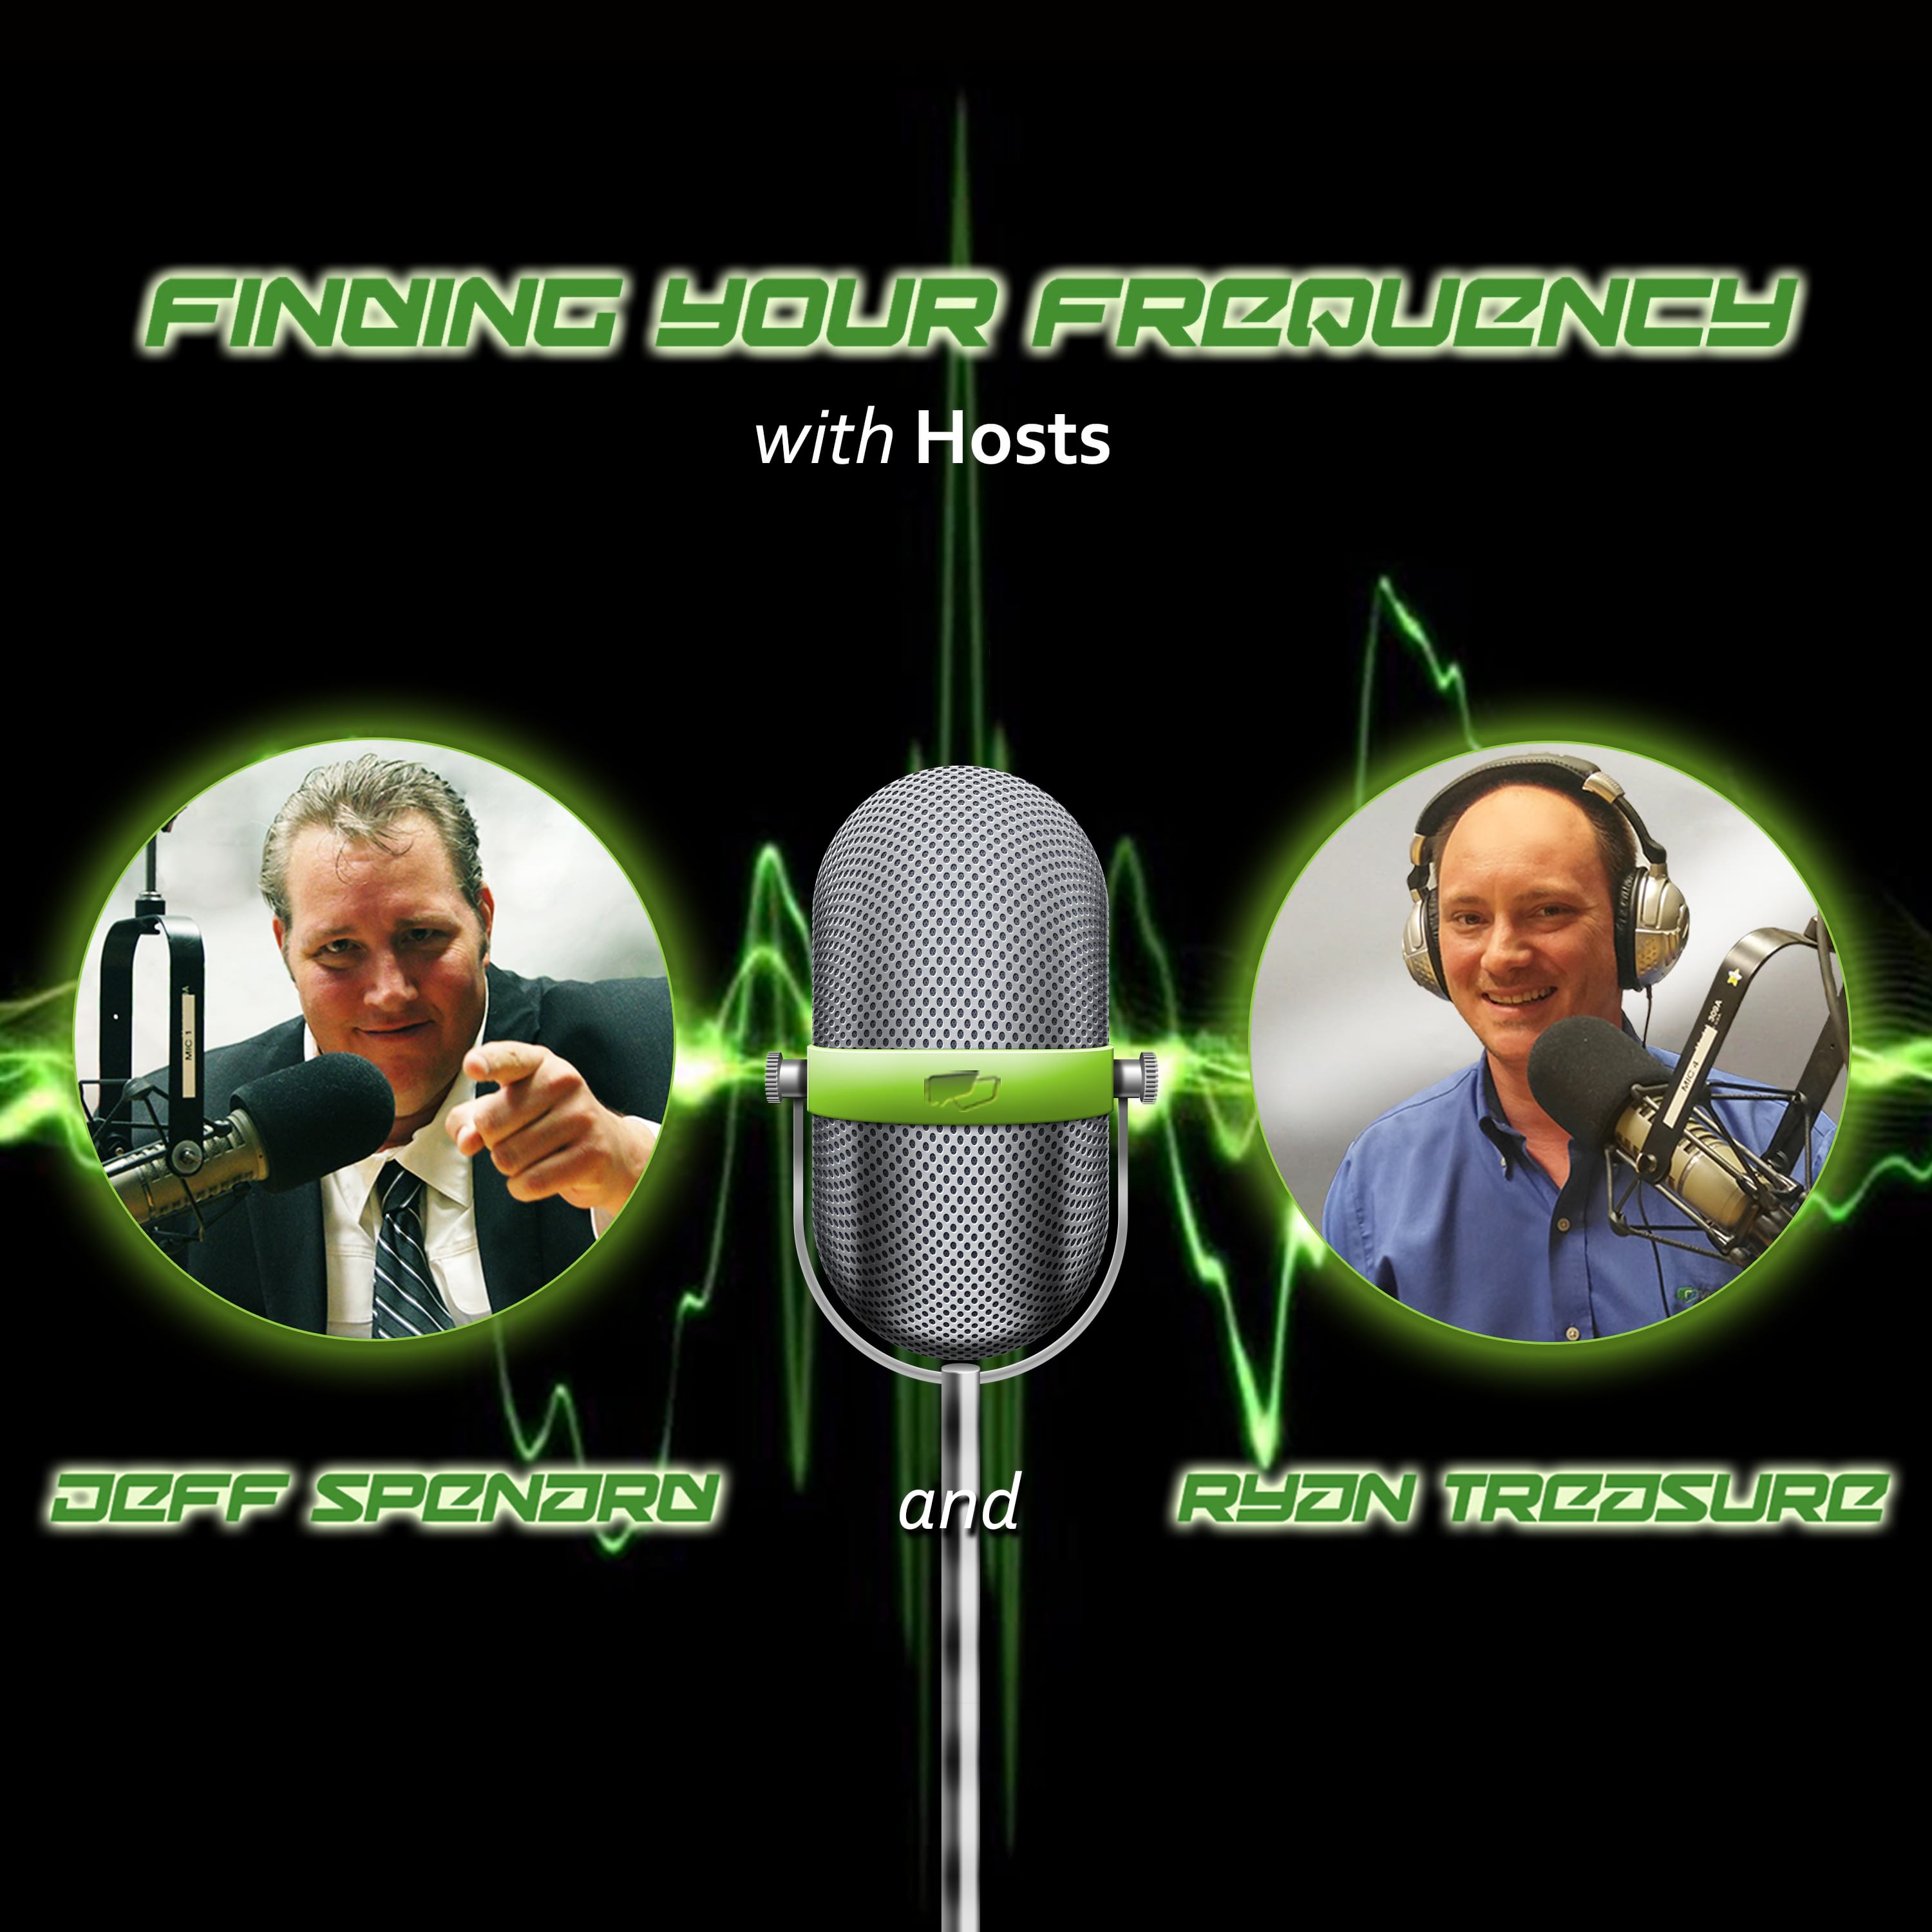 VoiceAmerica Finding Your Frequency show hosted by CEO Jeff Spenard and Vice President Ryan Treasure